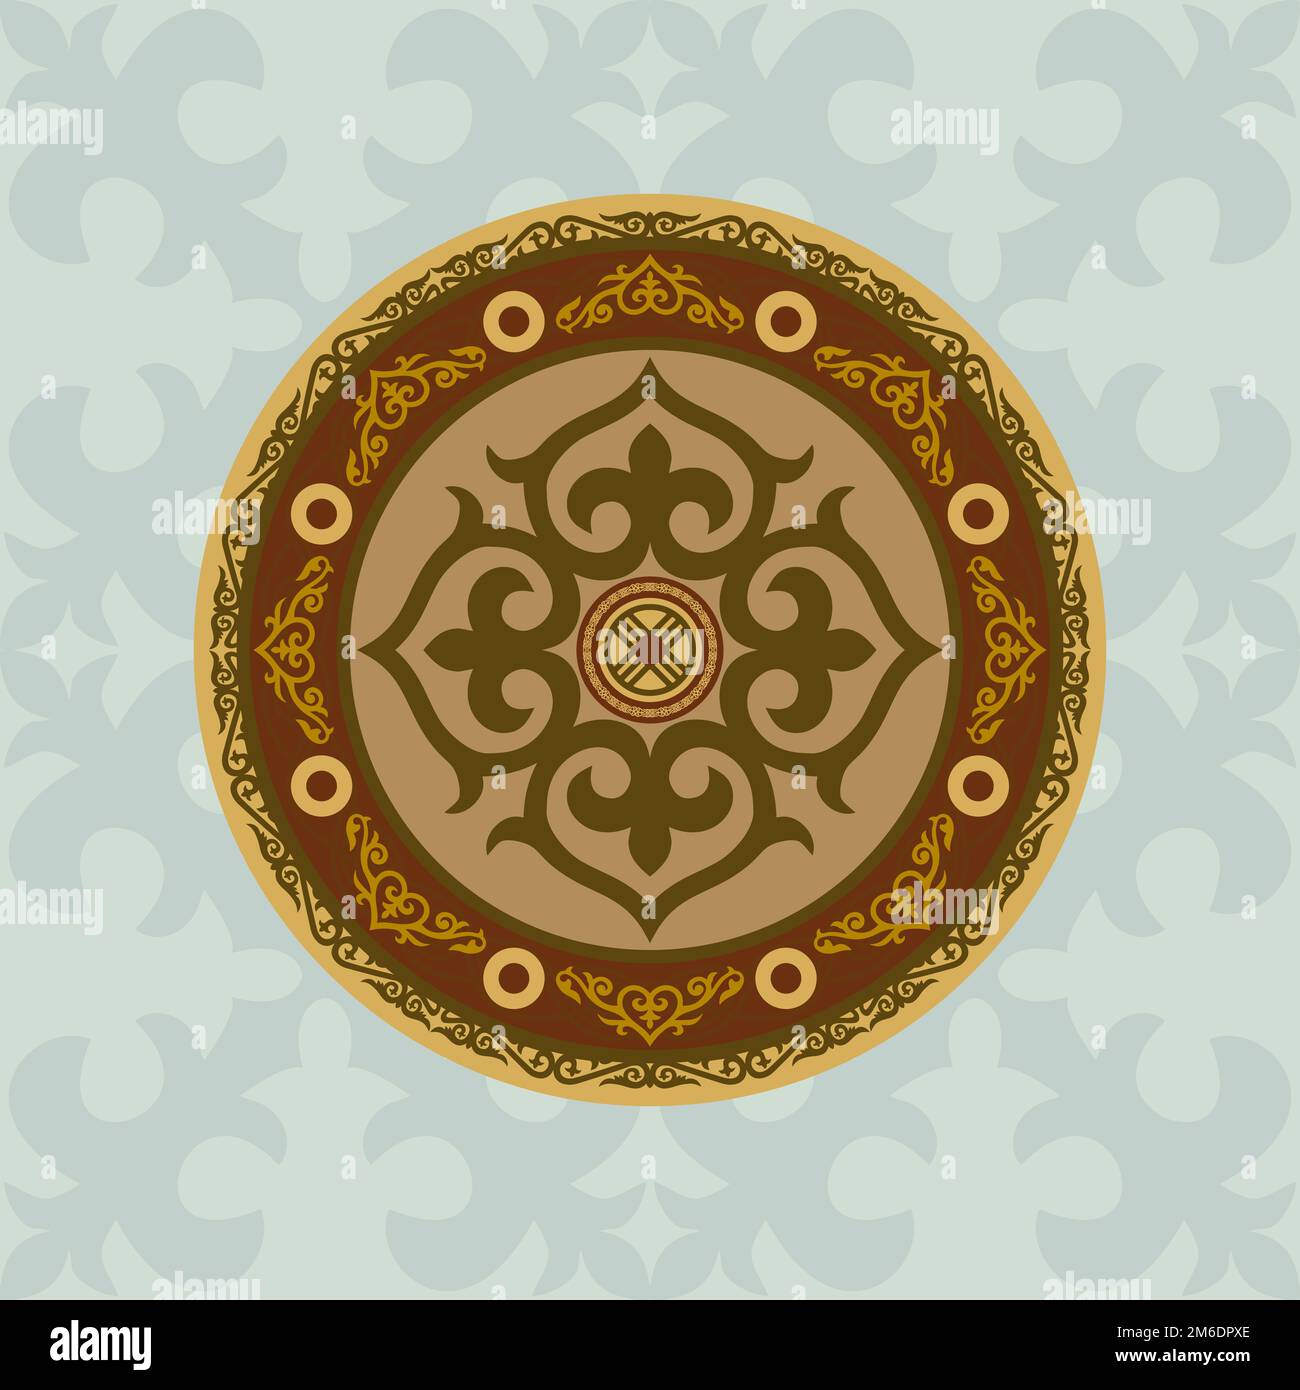 Shield of the Kazakh warrior, the Mongol. Asian National Sora in a circle. Steppe motifs Stock Photo